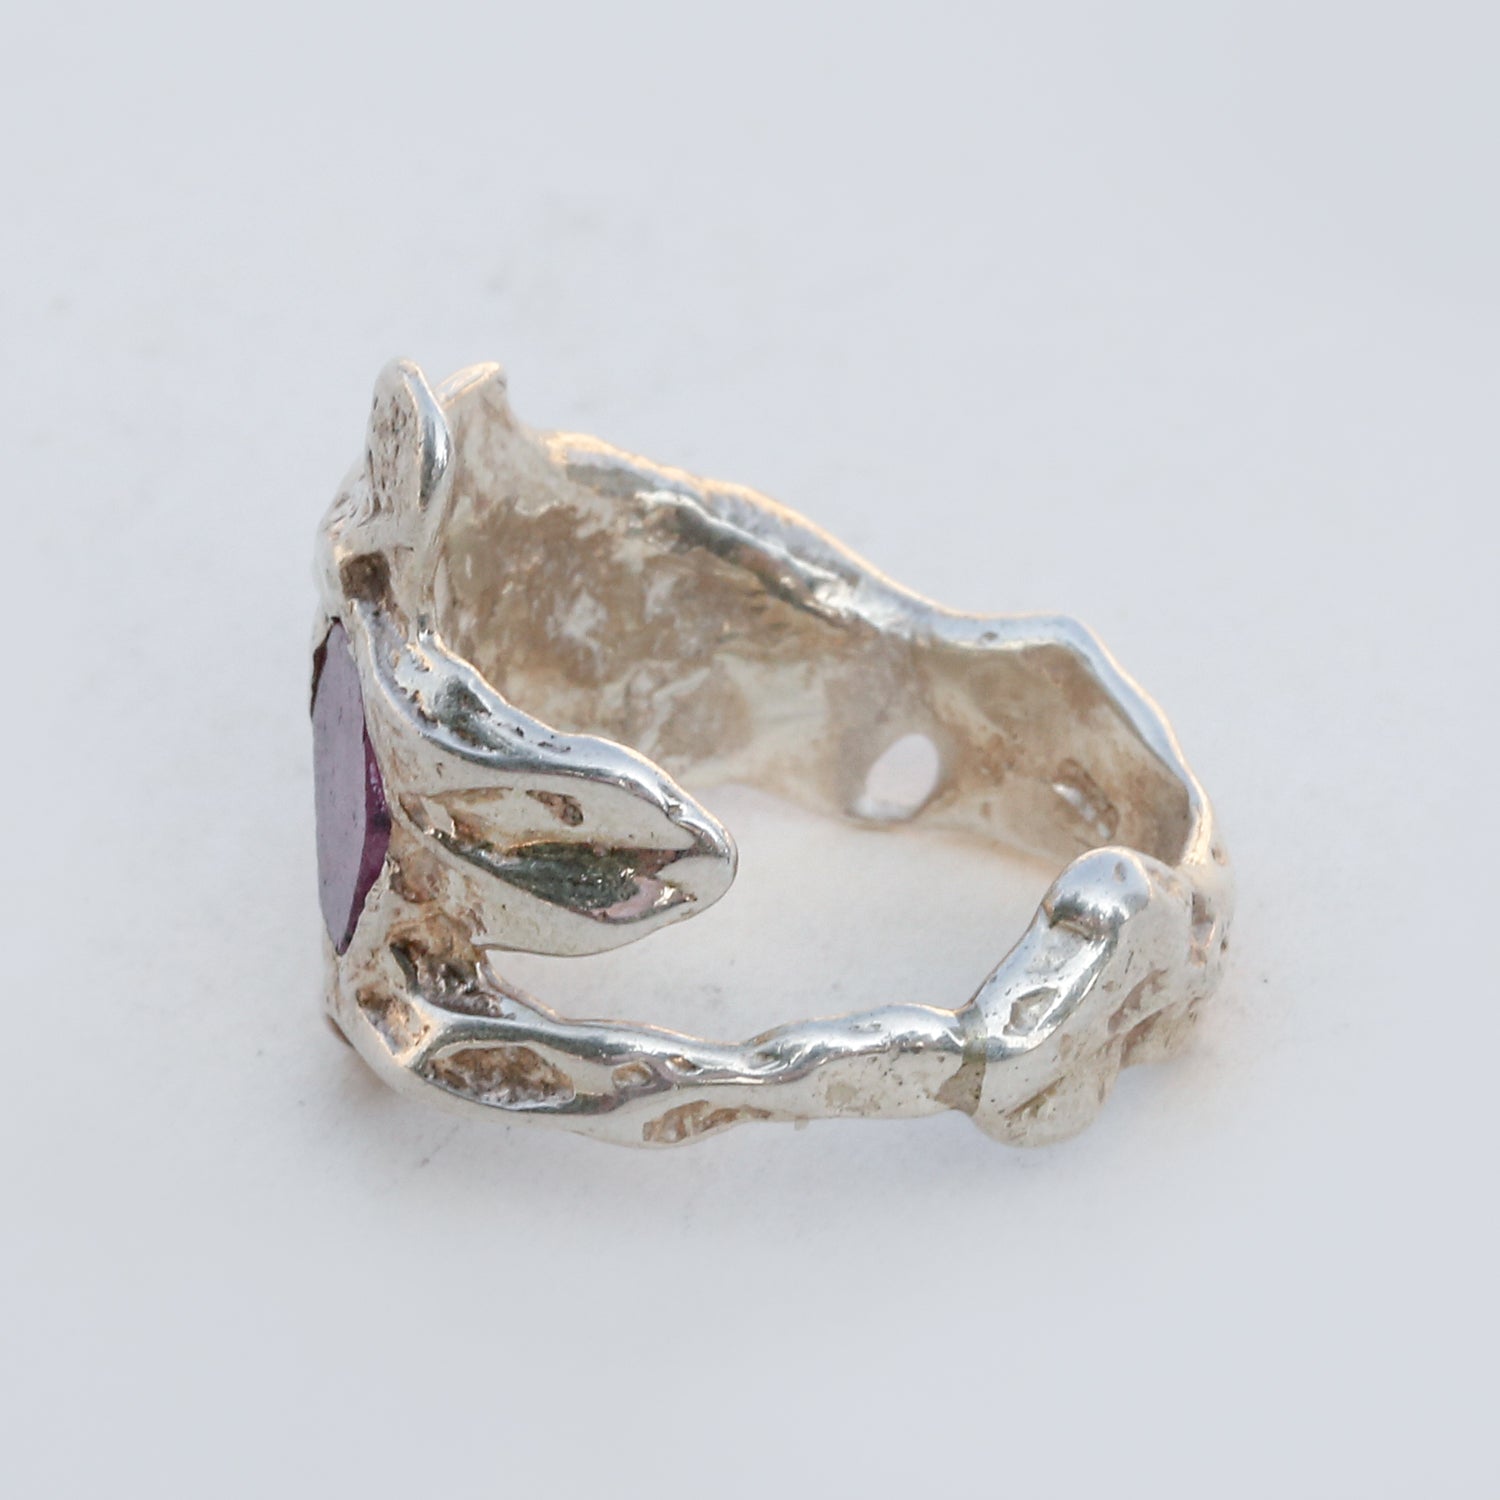 Sneer Silver and Ruby Ring